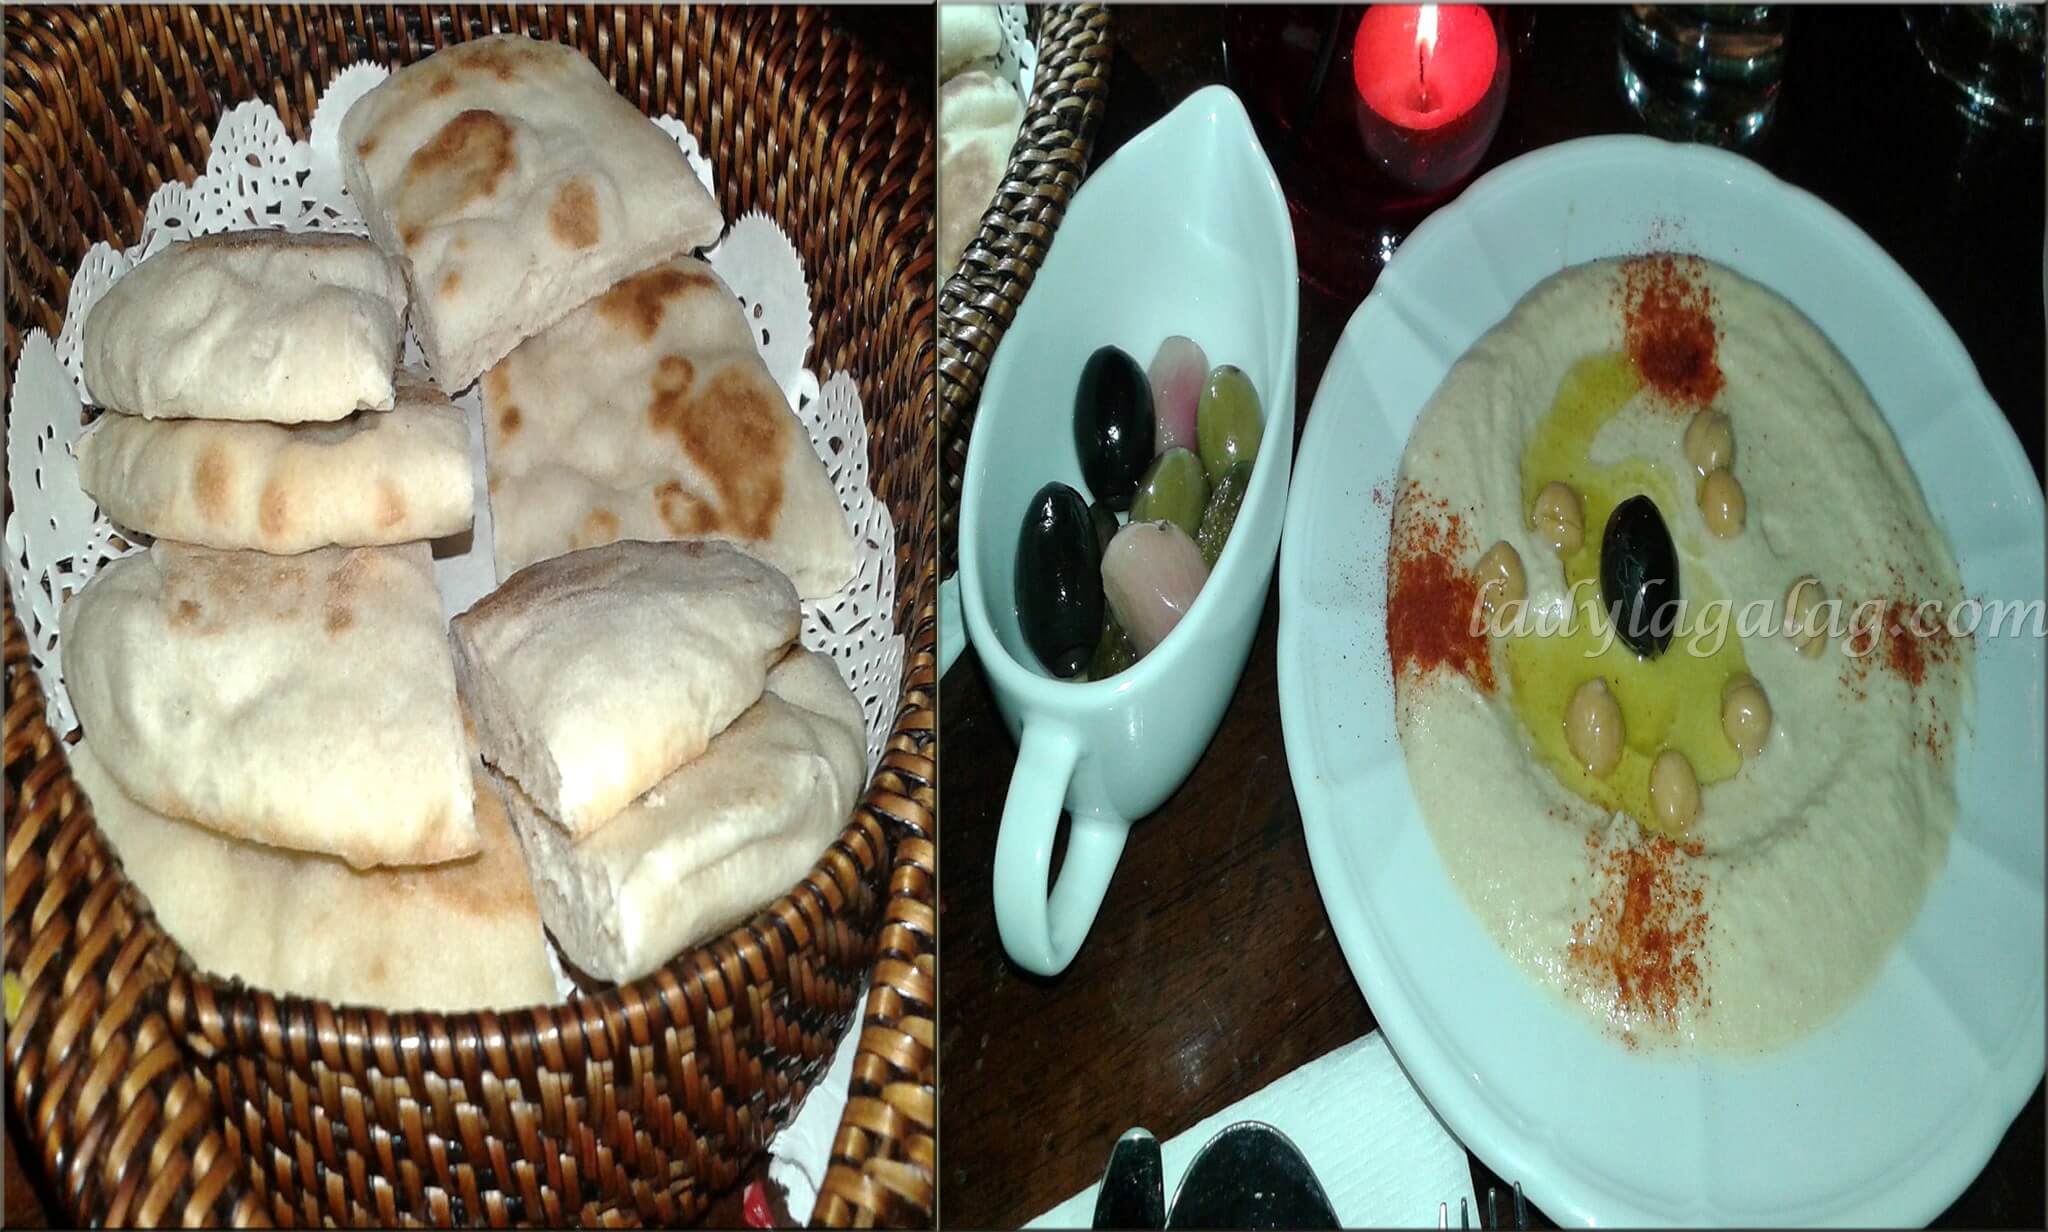 Hummus served from a restaurant in Malate